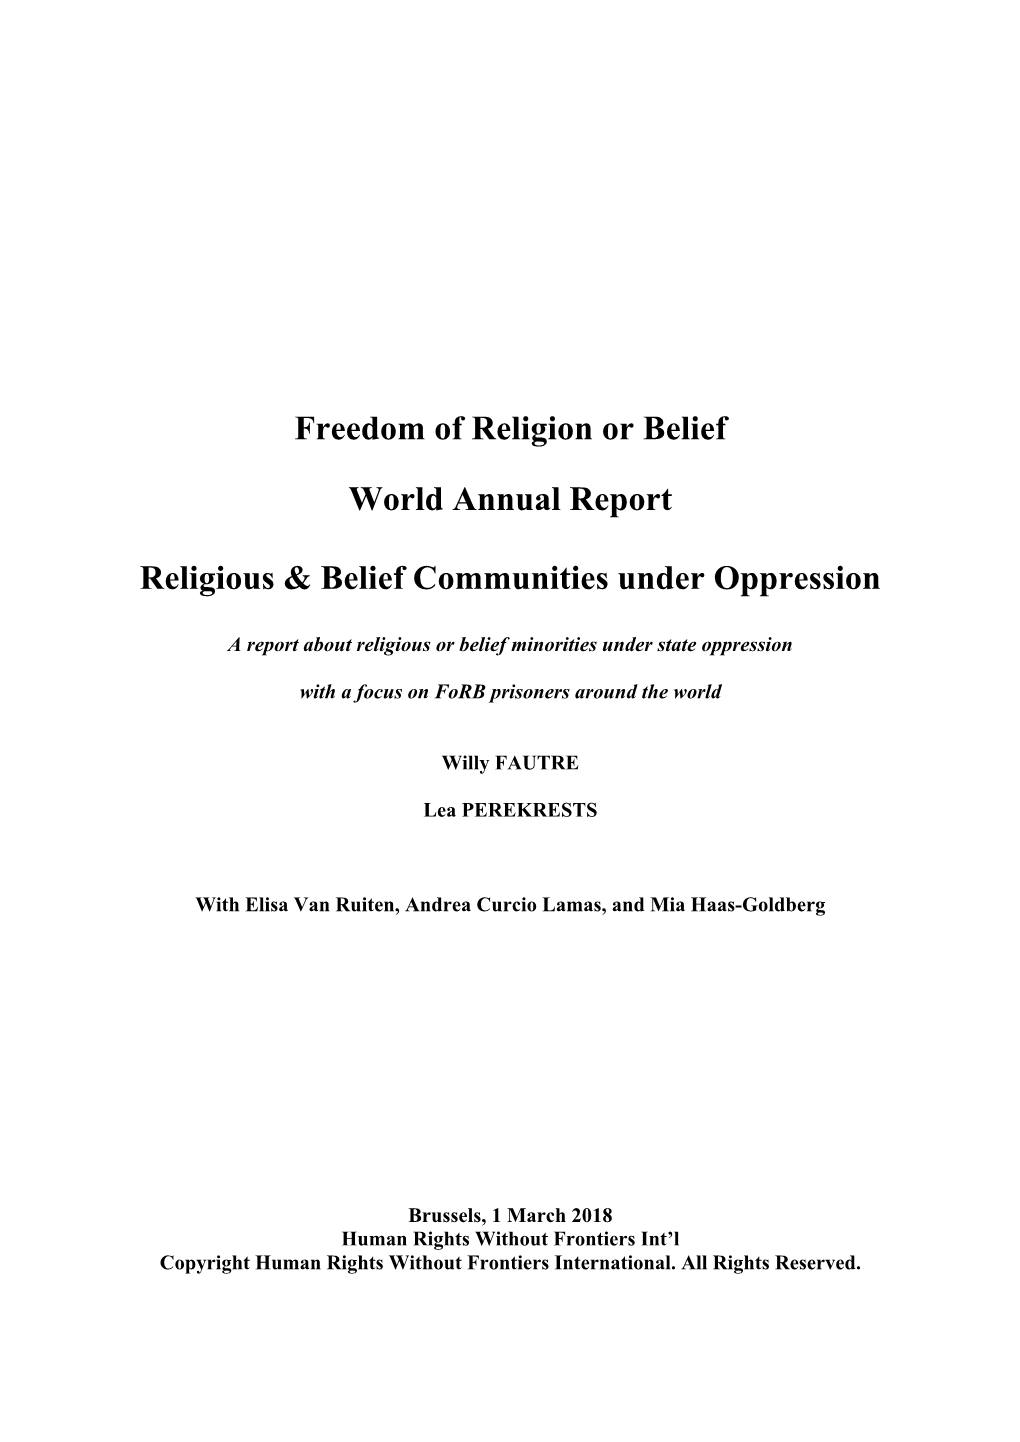 Freedom of Religion Or Belief World Annual Report Religious & Belief